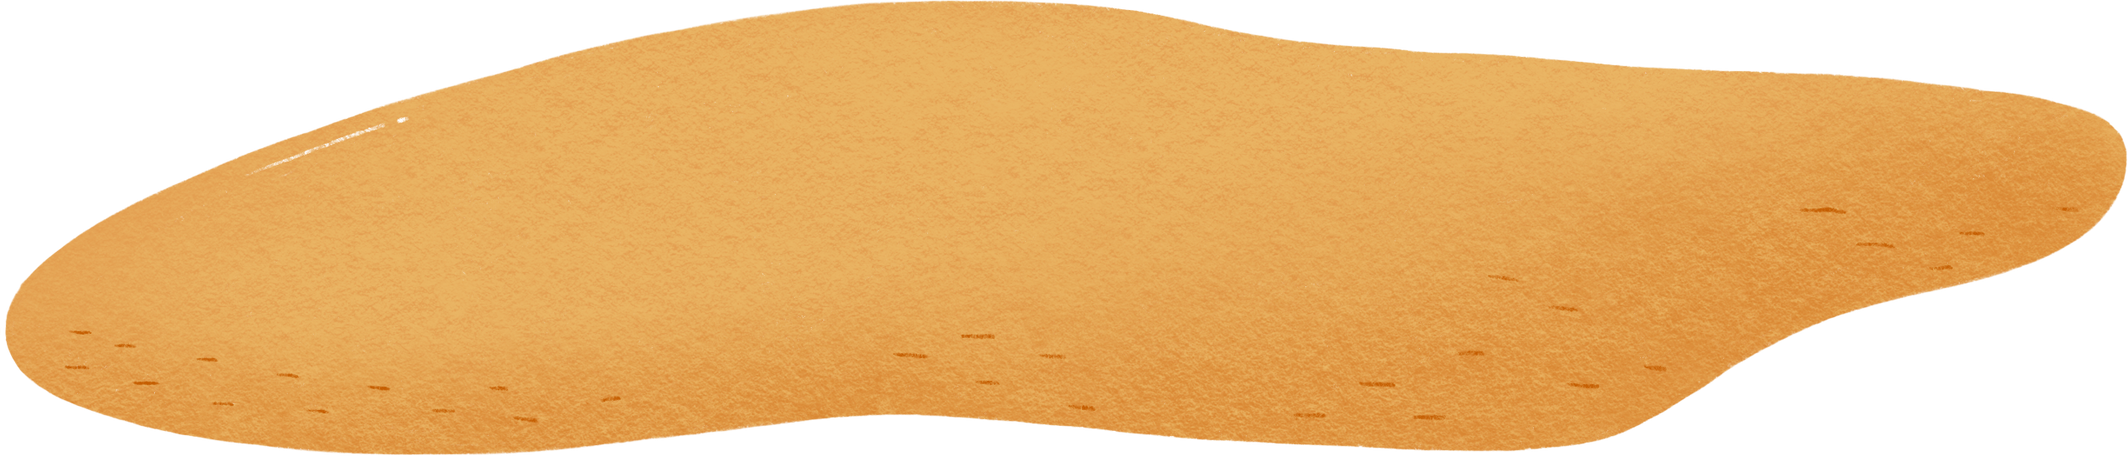 yellow sand Illustration in PNG, SVG